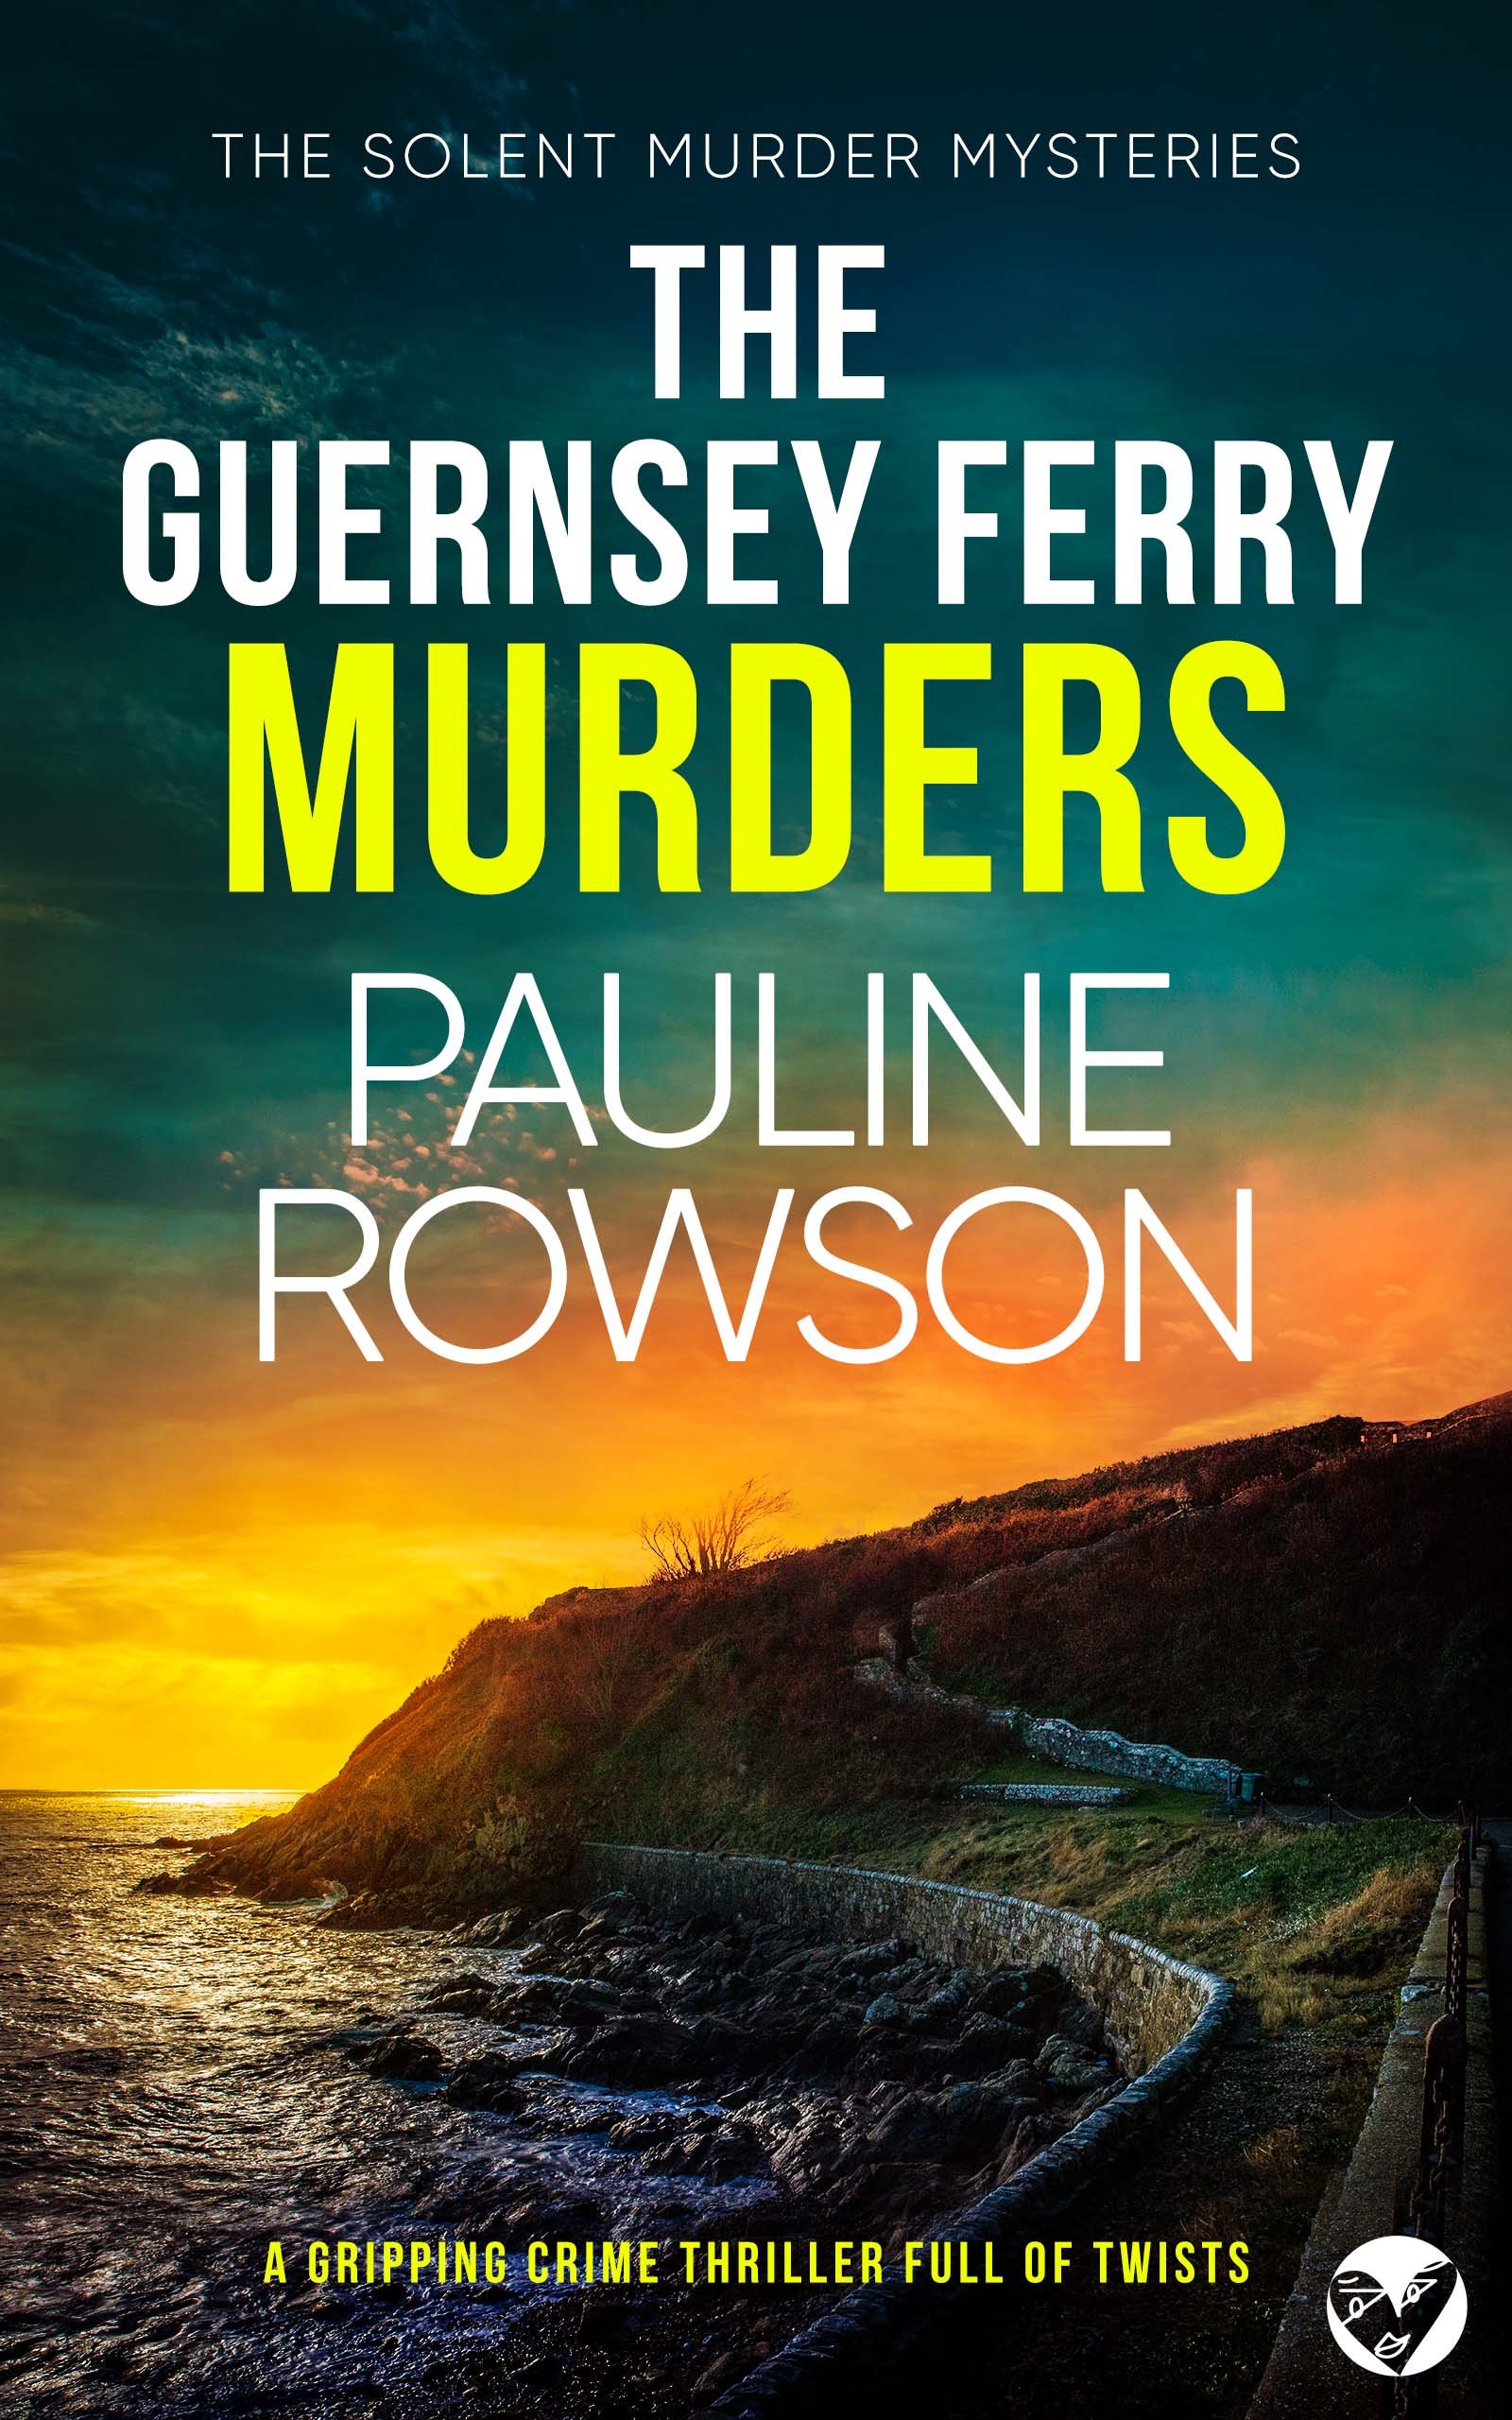 THE GUERNSEY FERRY MURDERS Cover publish.jpg